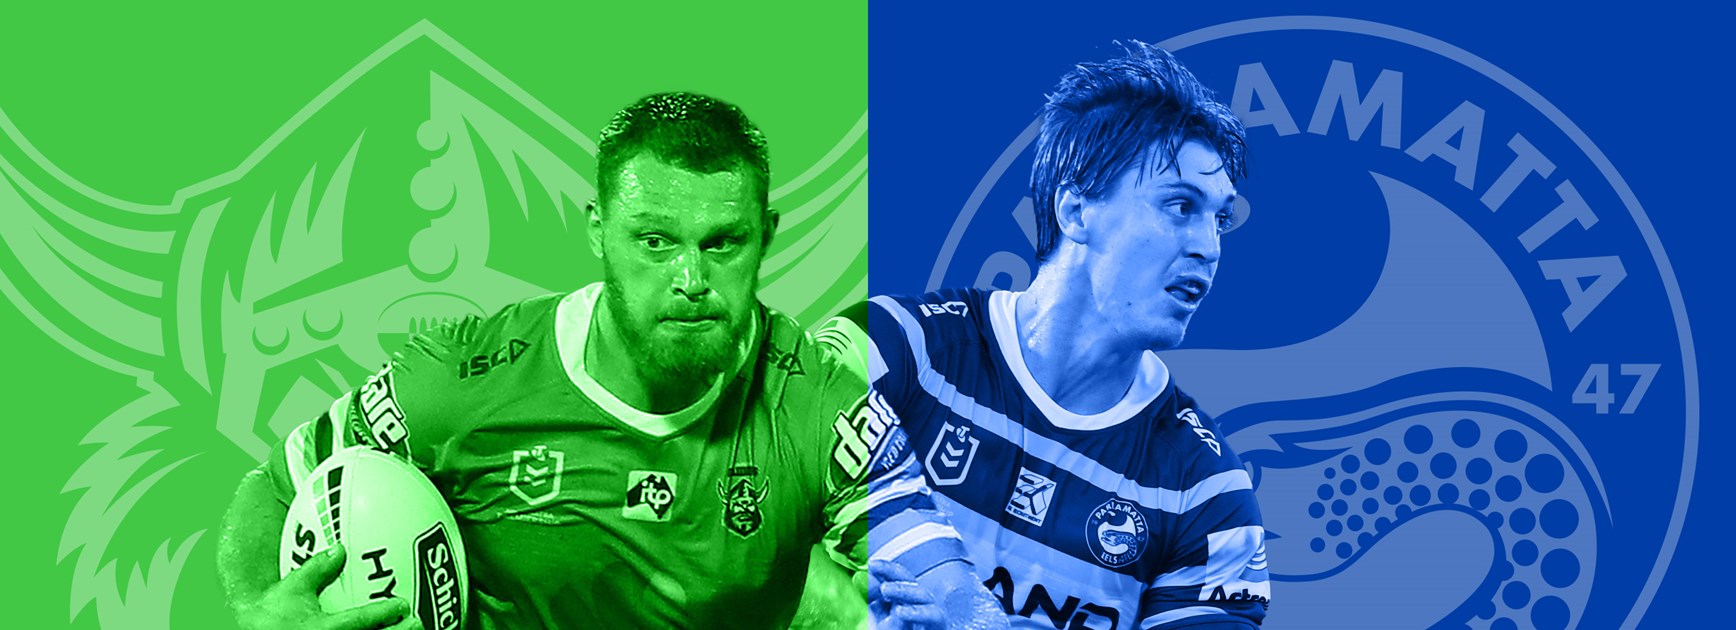 Eels v Raiders, Match Preview